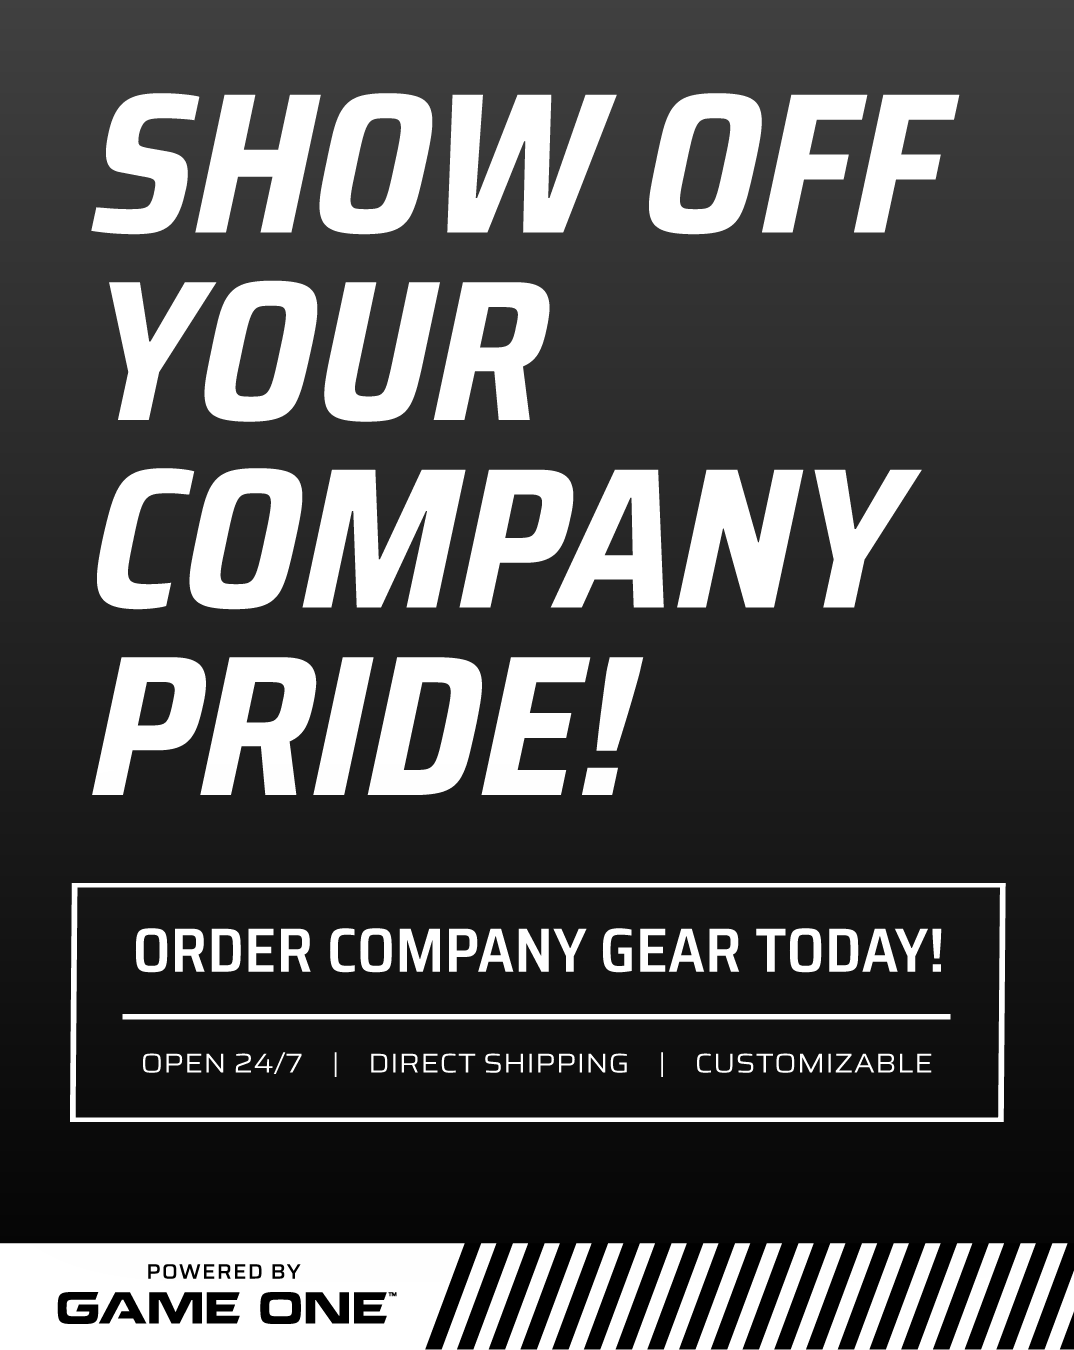 Show off your company pride - Powered by Game One